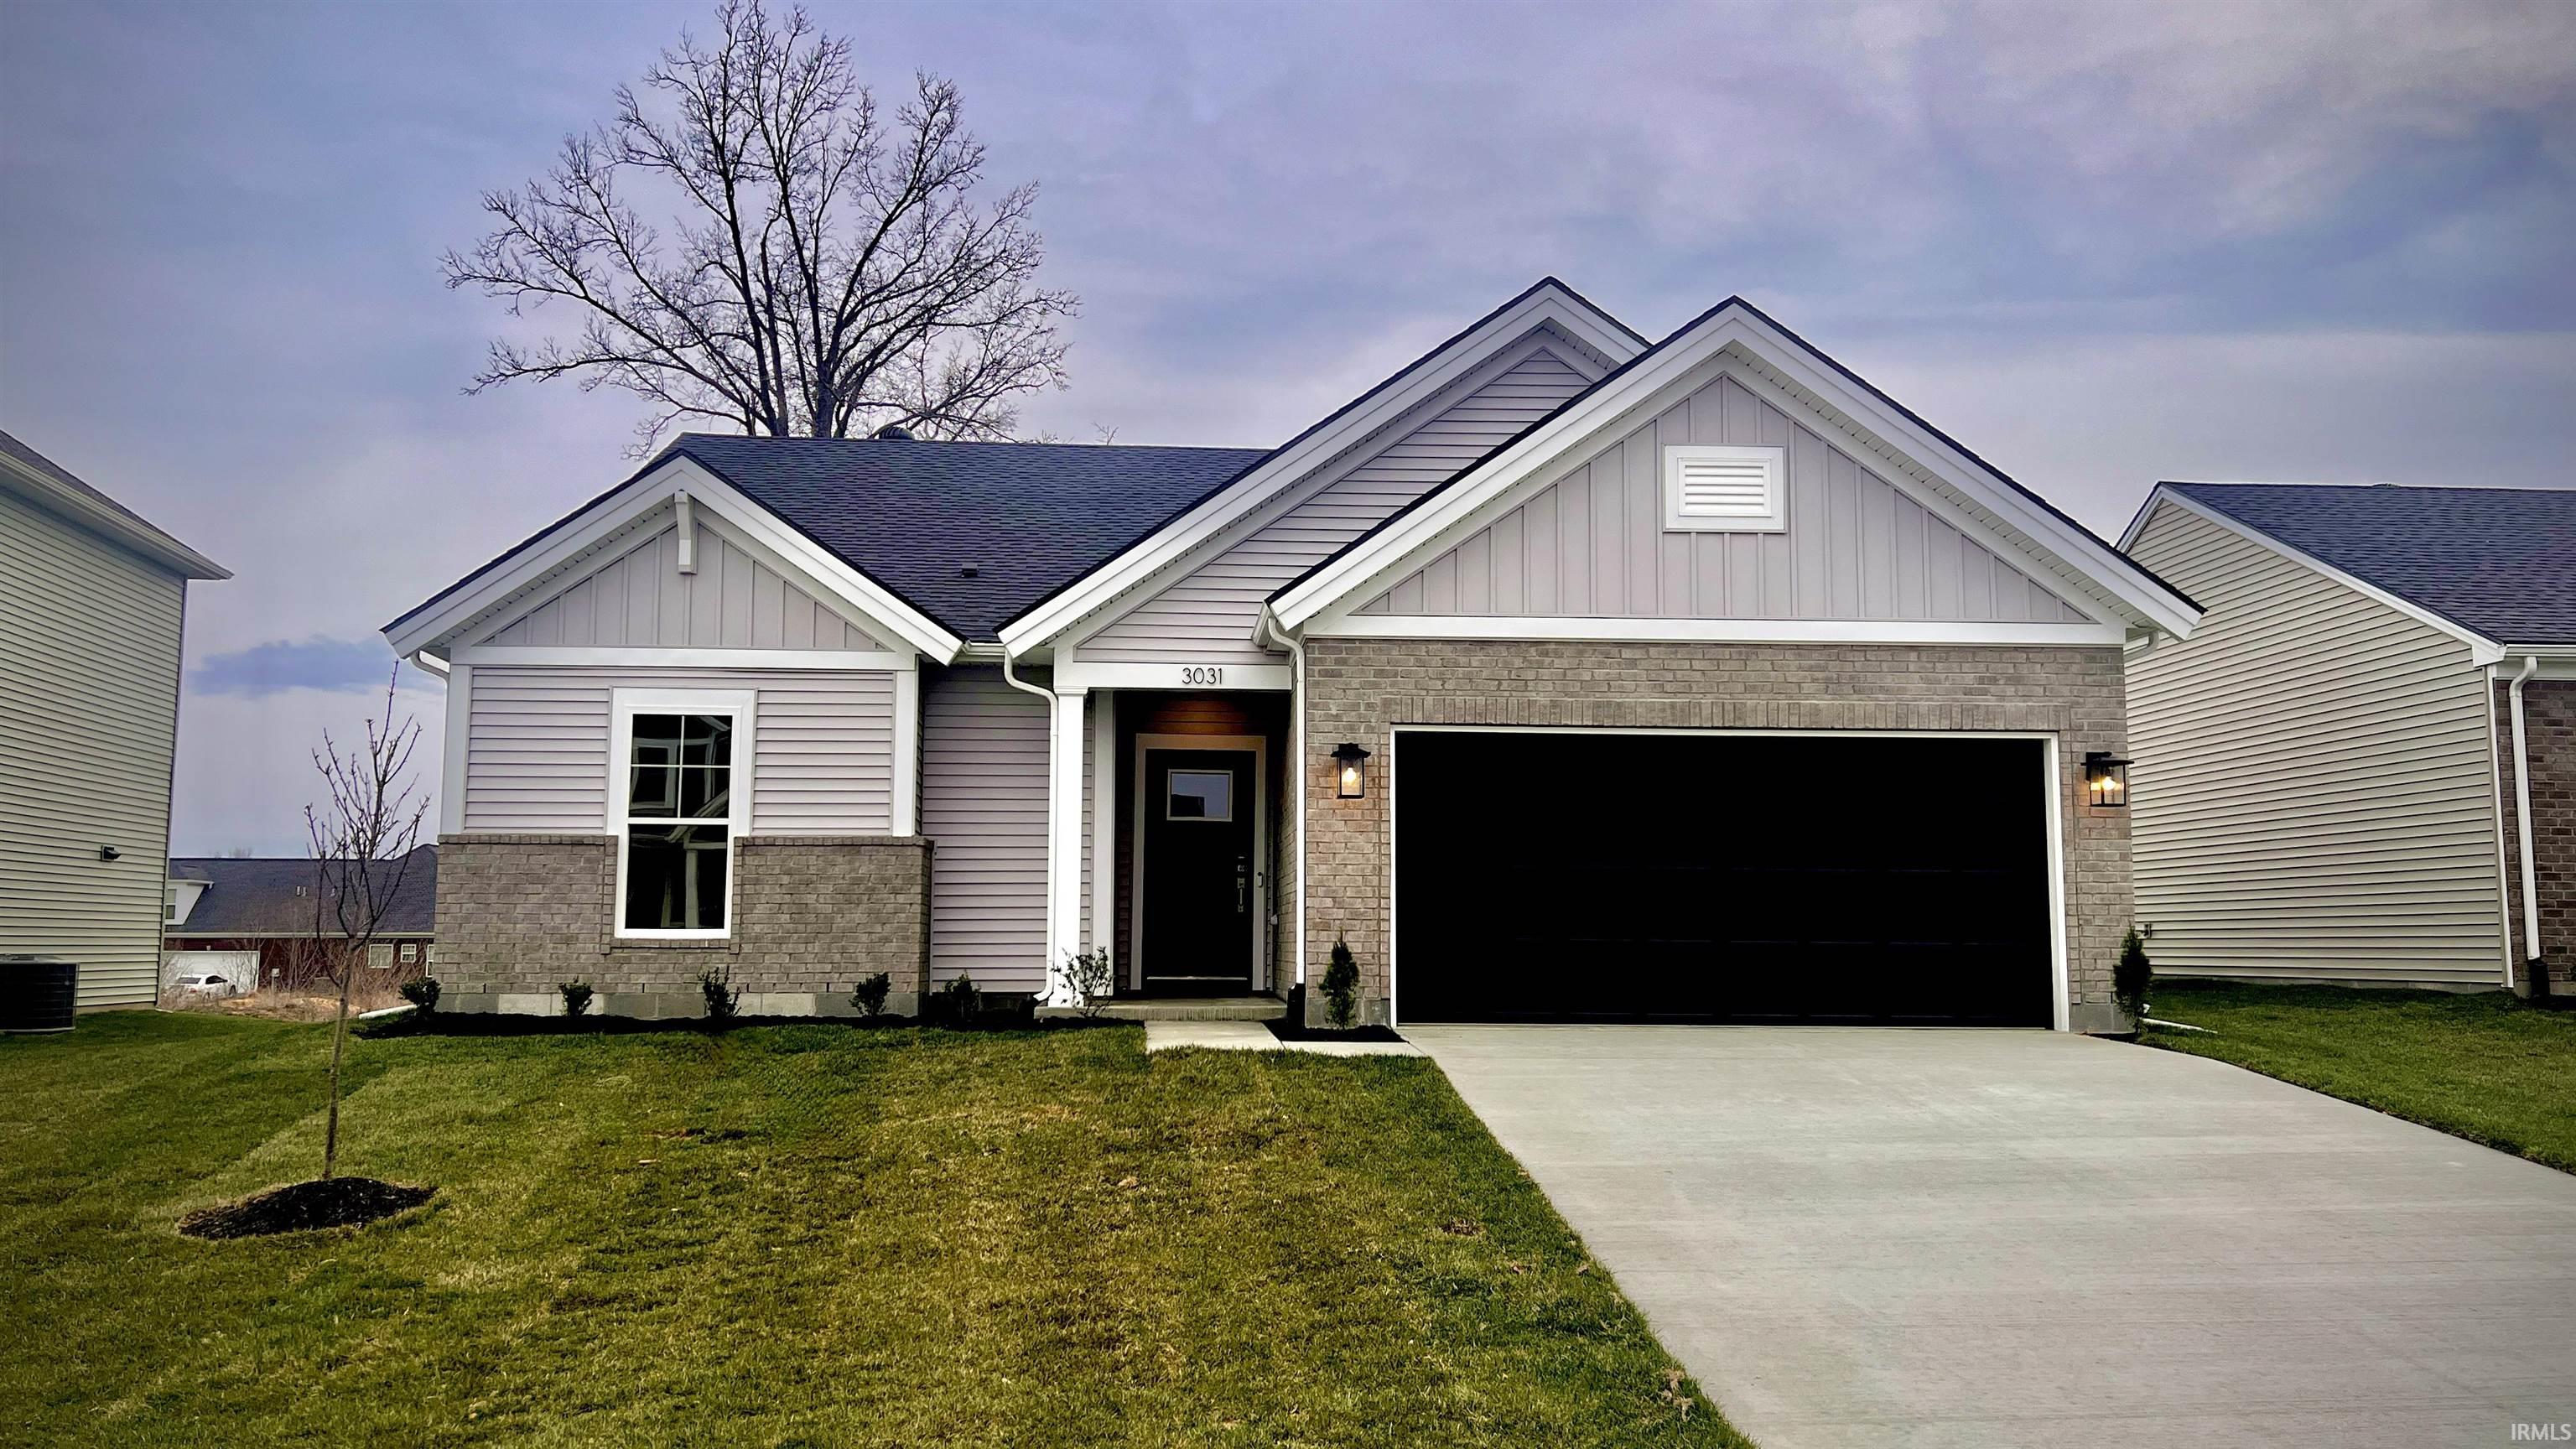 3031 Tipperary Drive, Evansville, IN 